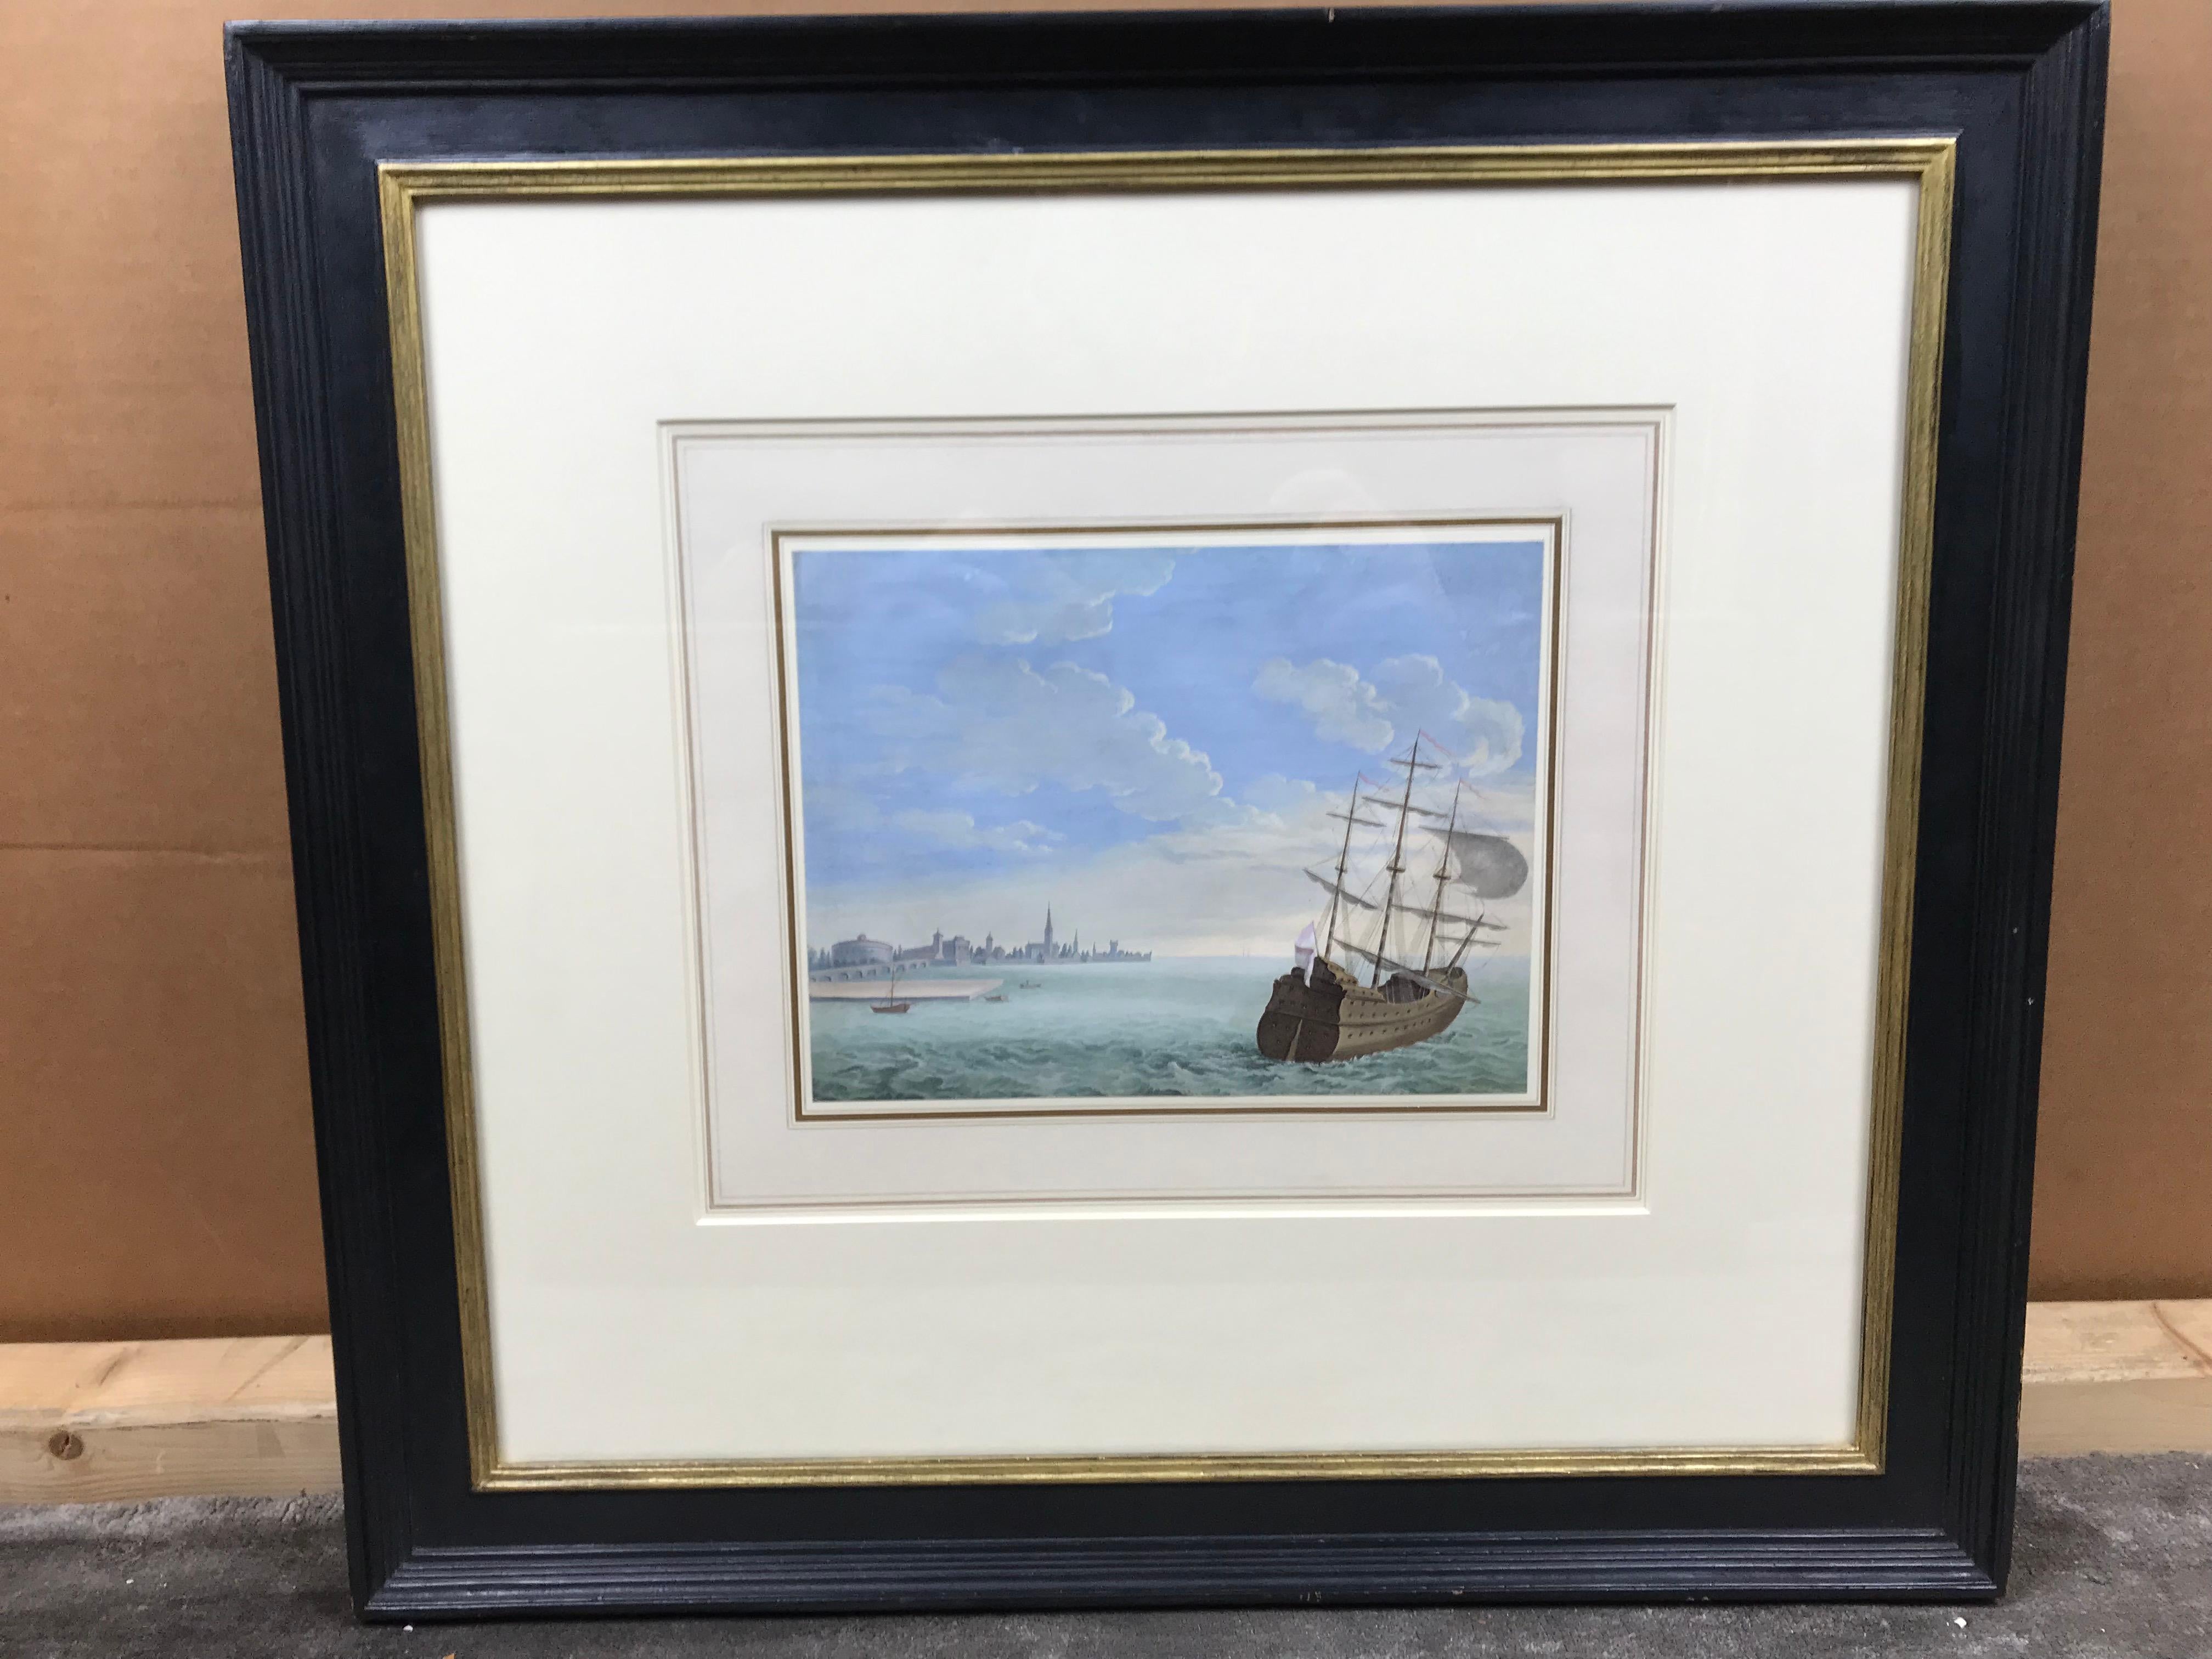 A Marine scene painting off the coast - Painting by Unknown